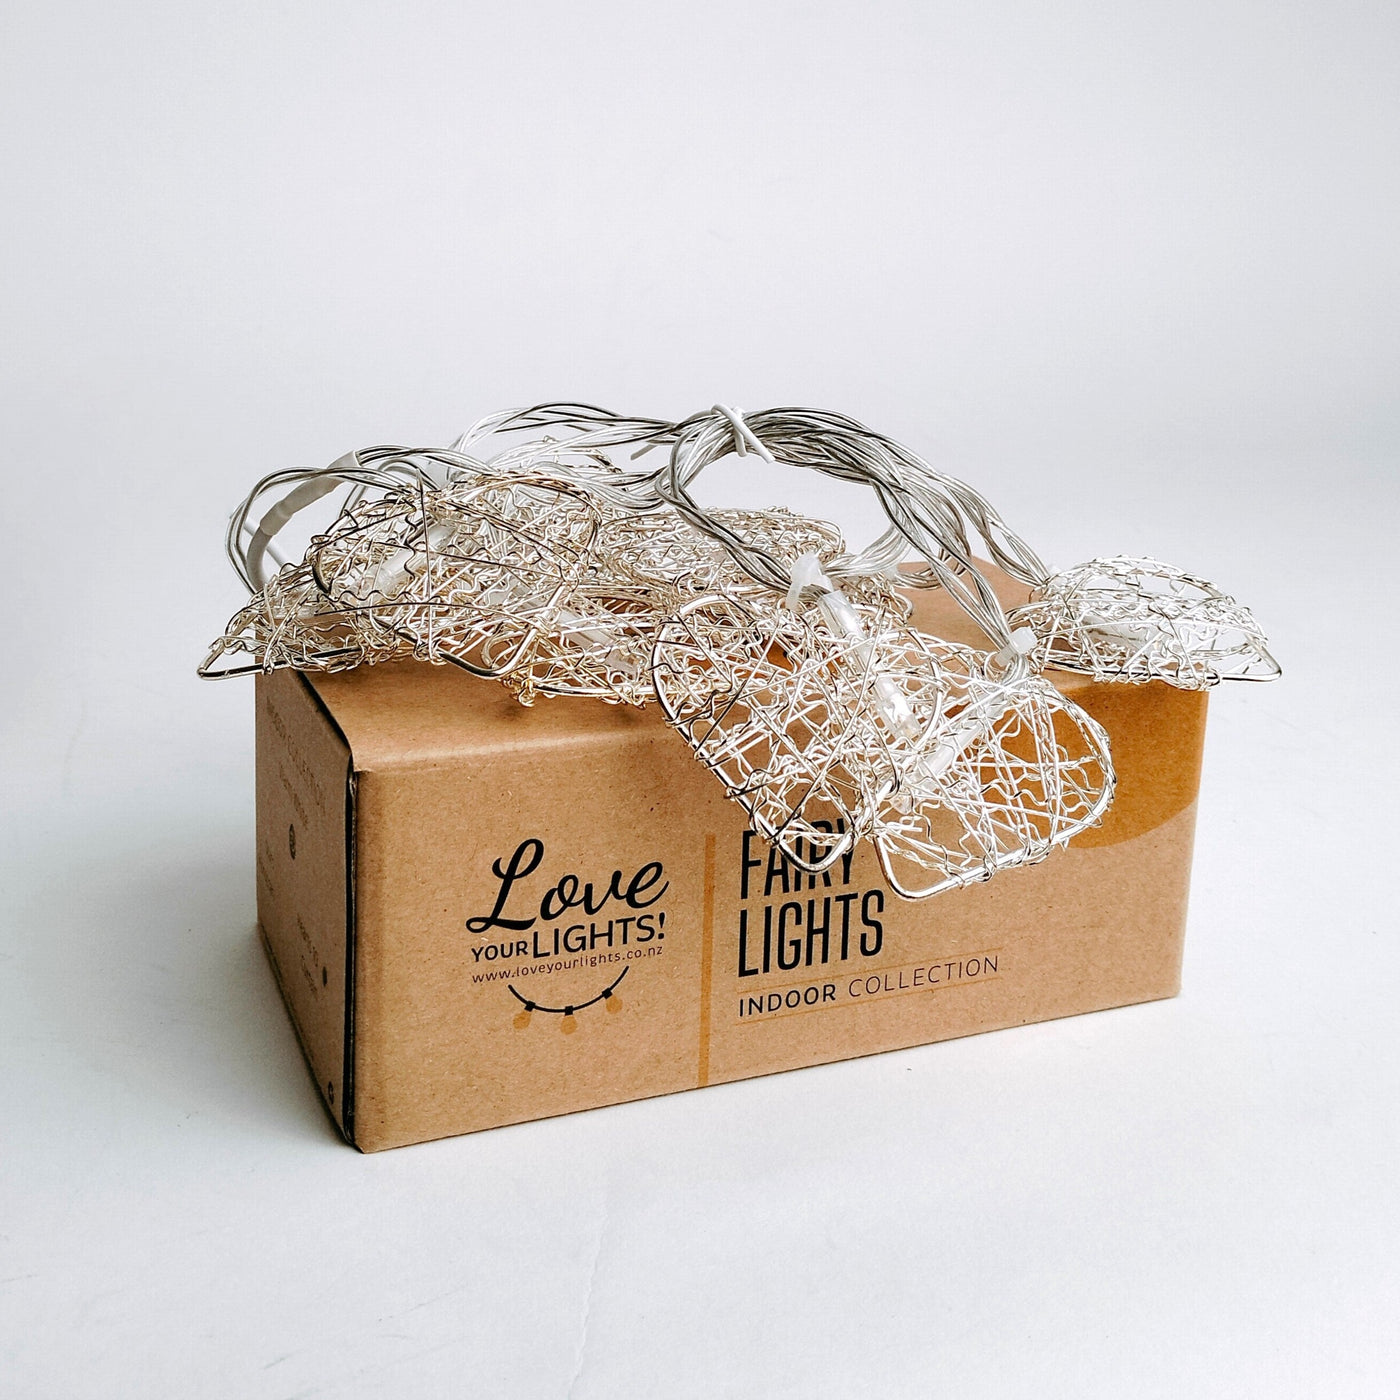 20 Hearts Fairy Lights from Love Your Lights